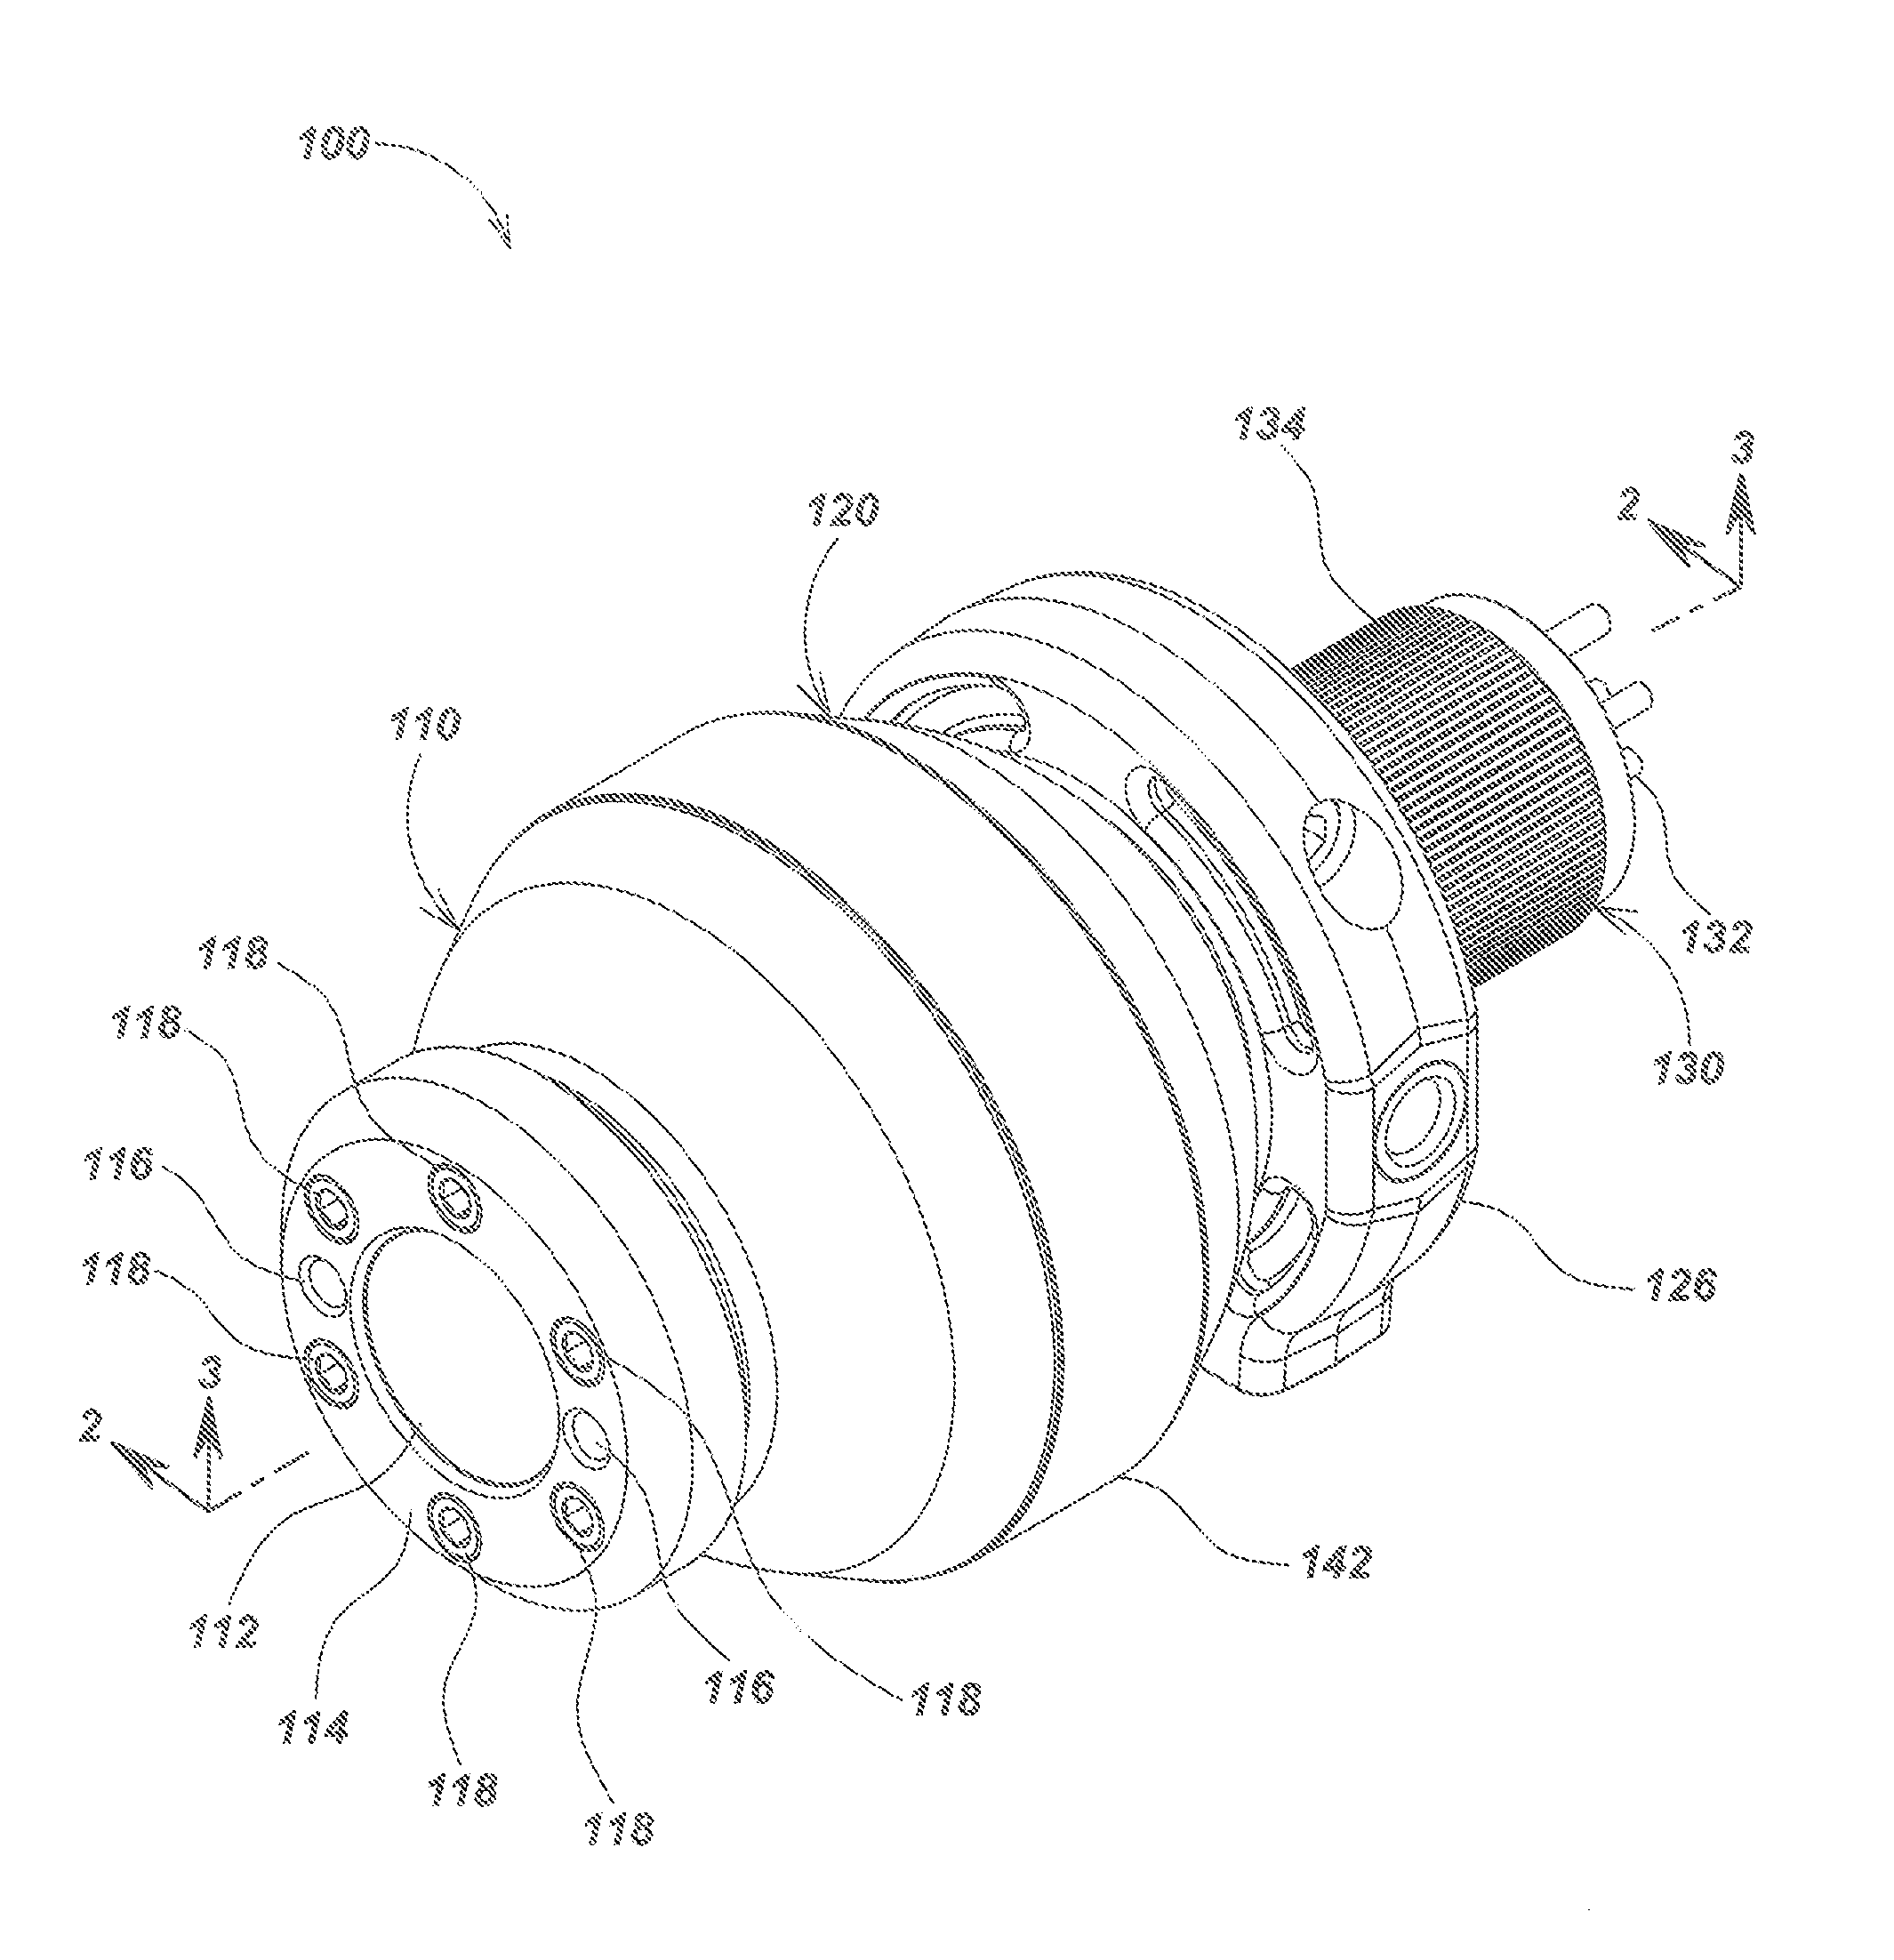 LED spherical light fixtures with enhanced heat dissipation